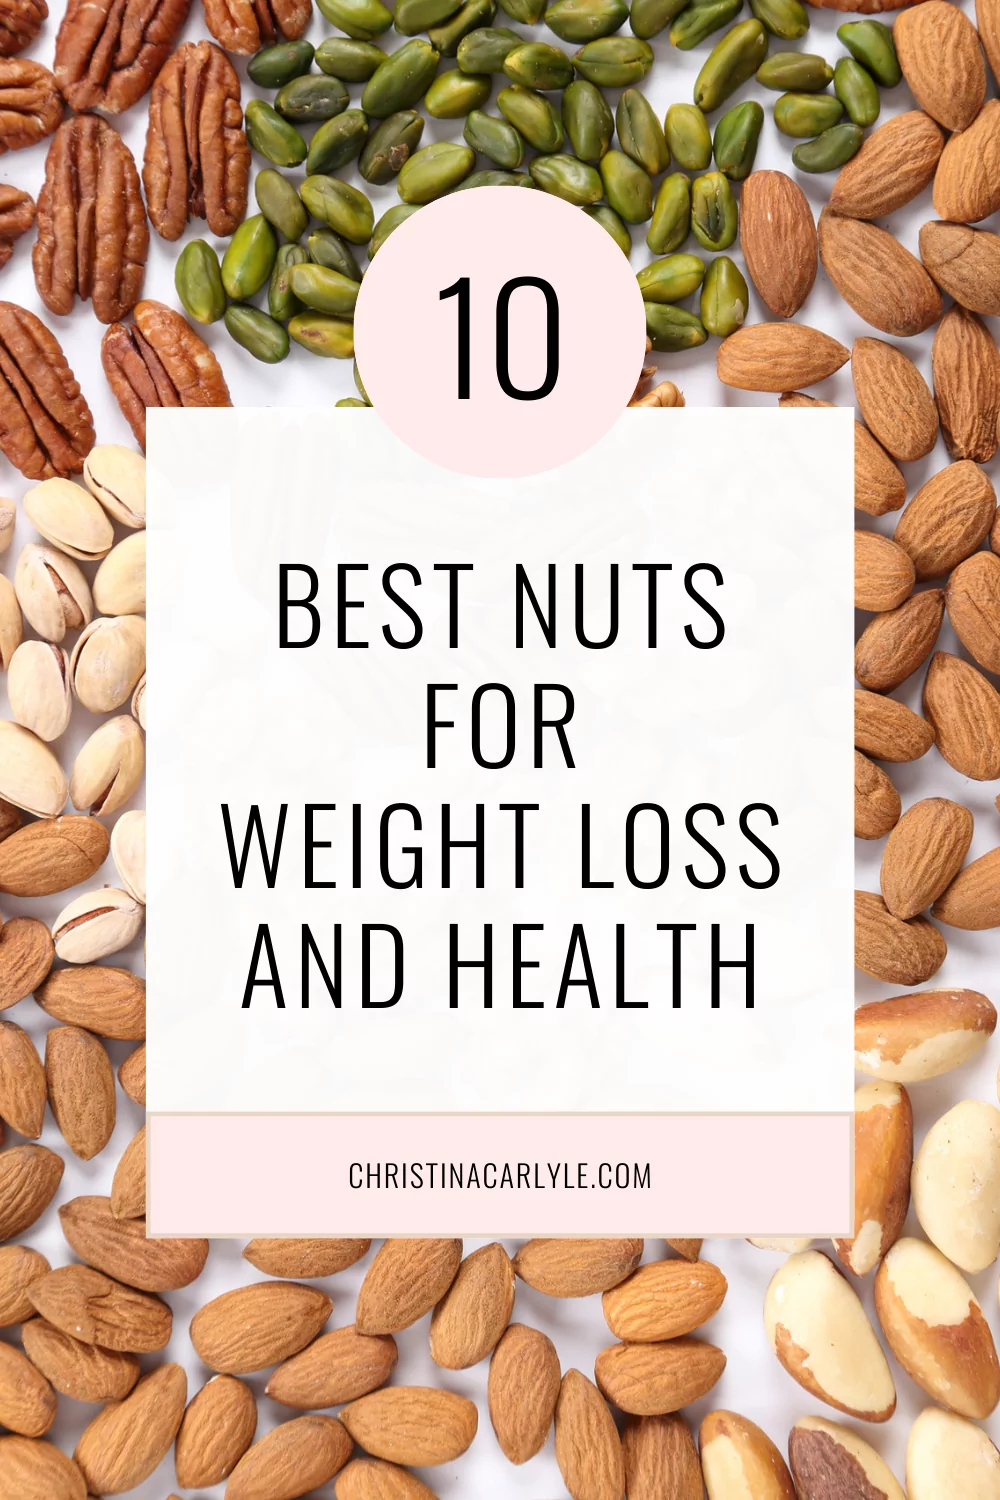 The 8 Best Nuts for Weight Loss and Nutrition